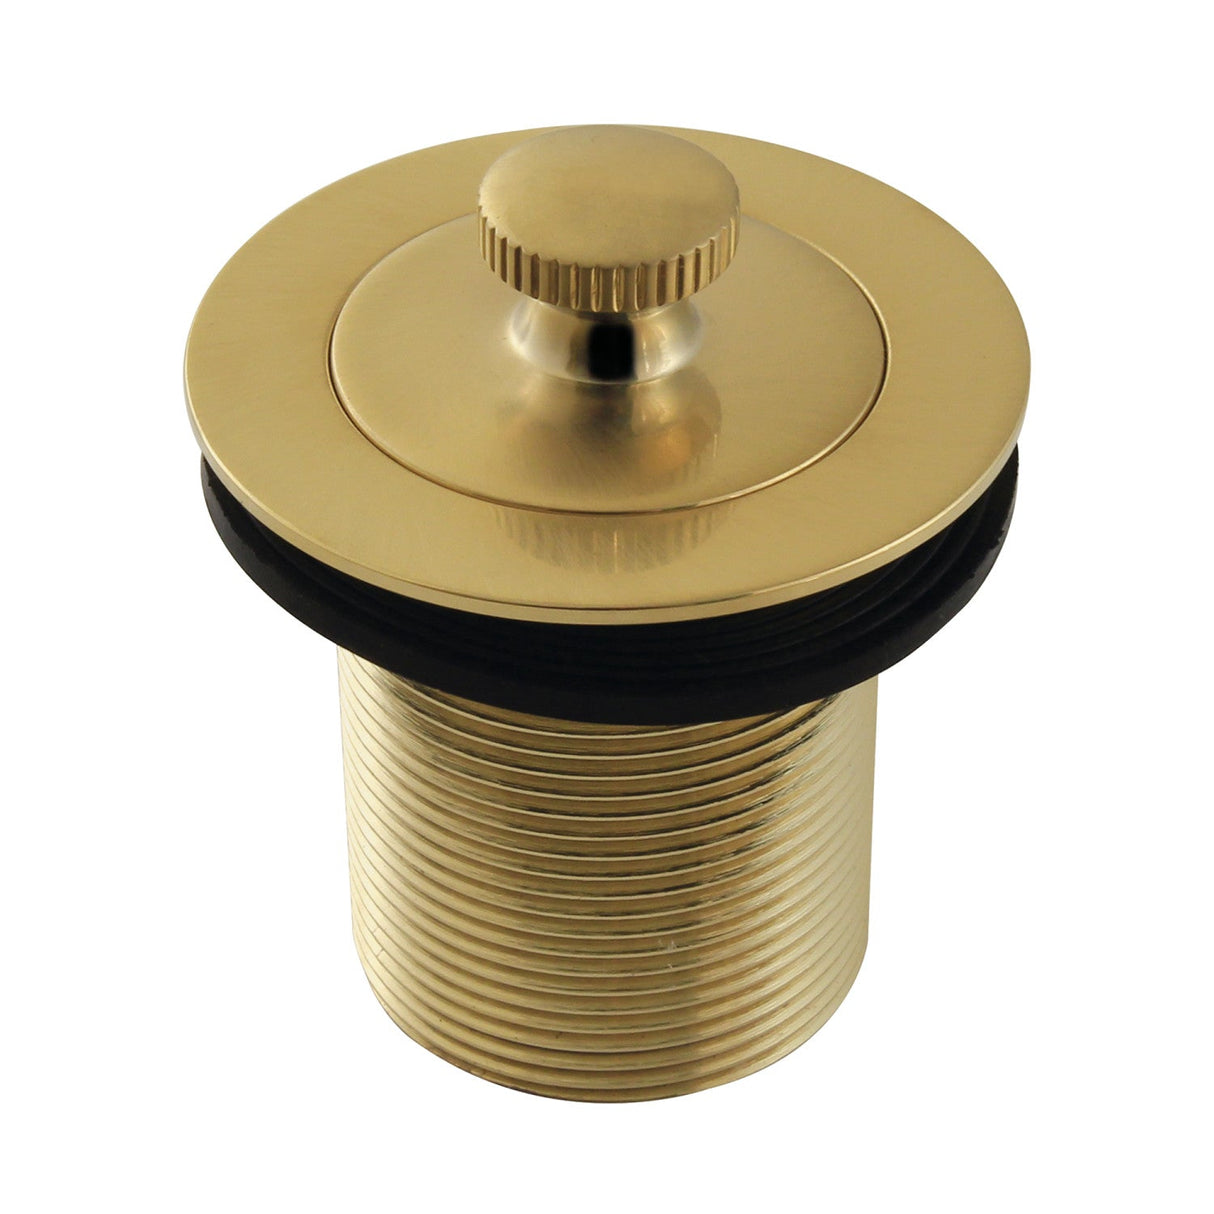 Made To Match DLT20SB 1-1/2-Inch Lift and Turn Tub Drain with 2-Inch Body Thread, Brushed Brass